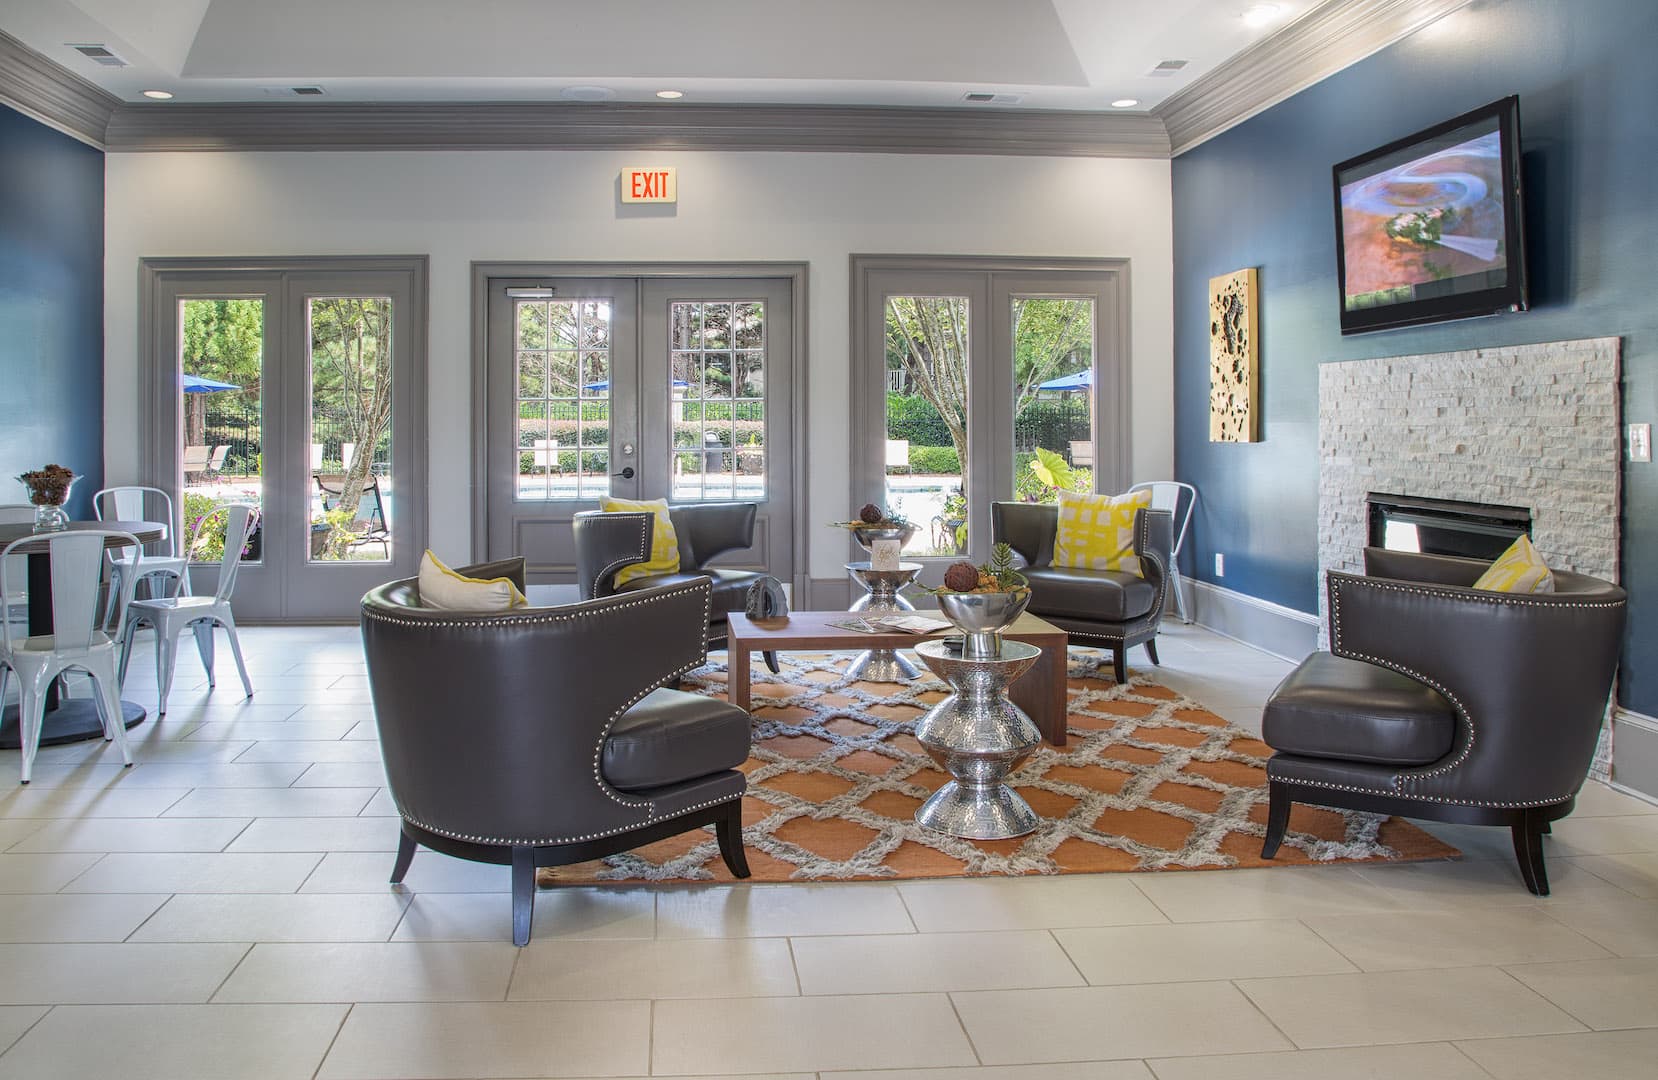 Leasing center waiting area, overlooking pool